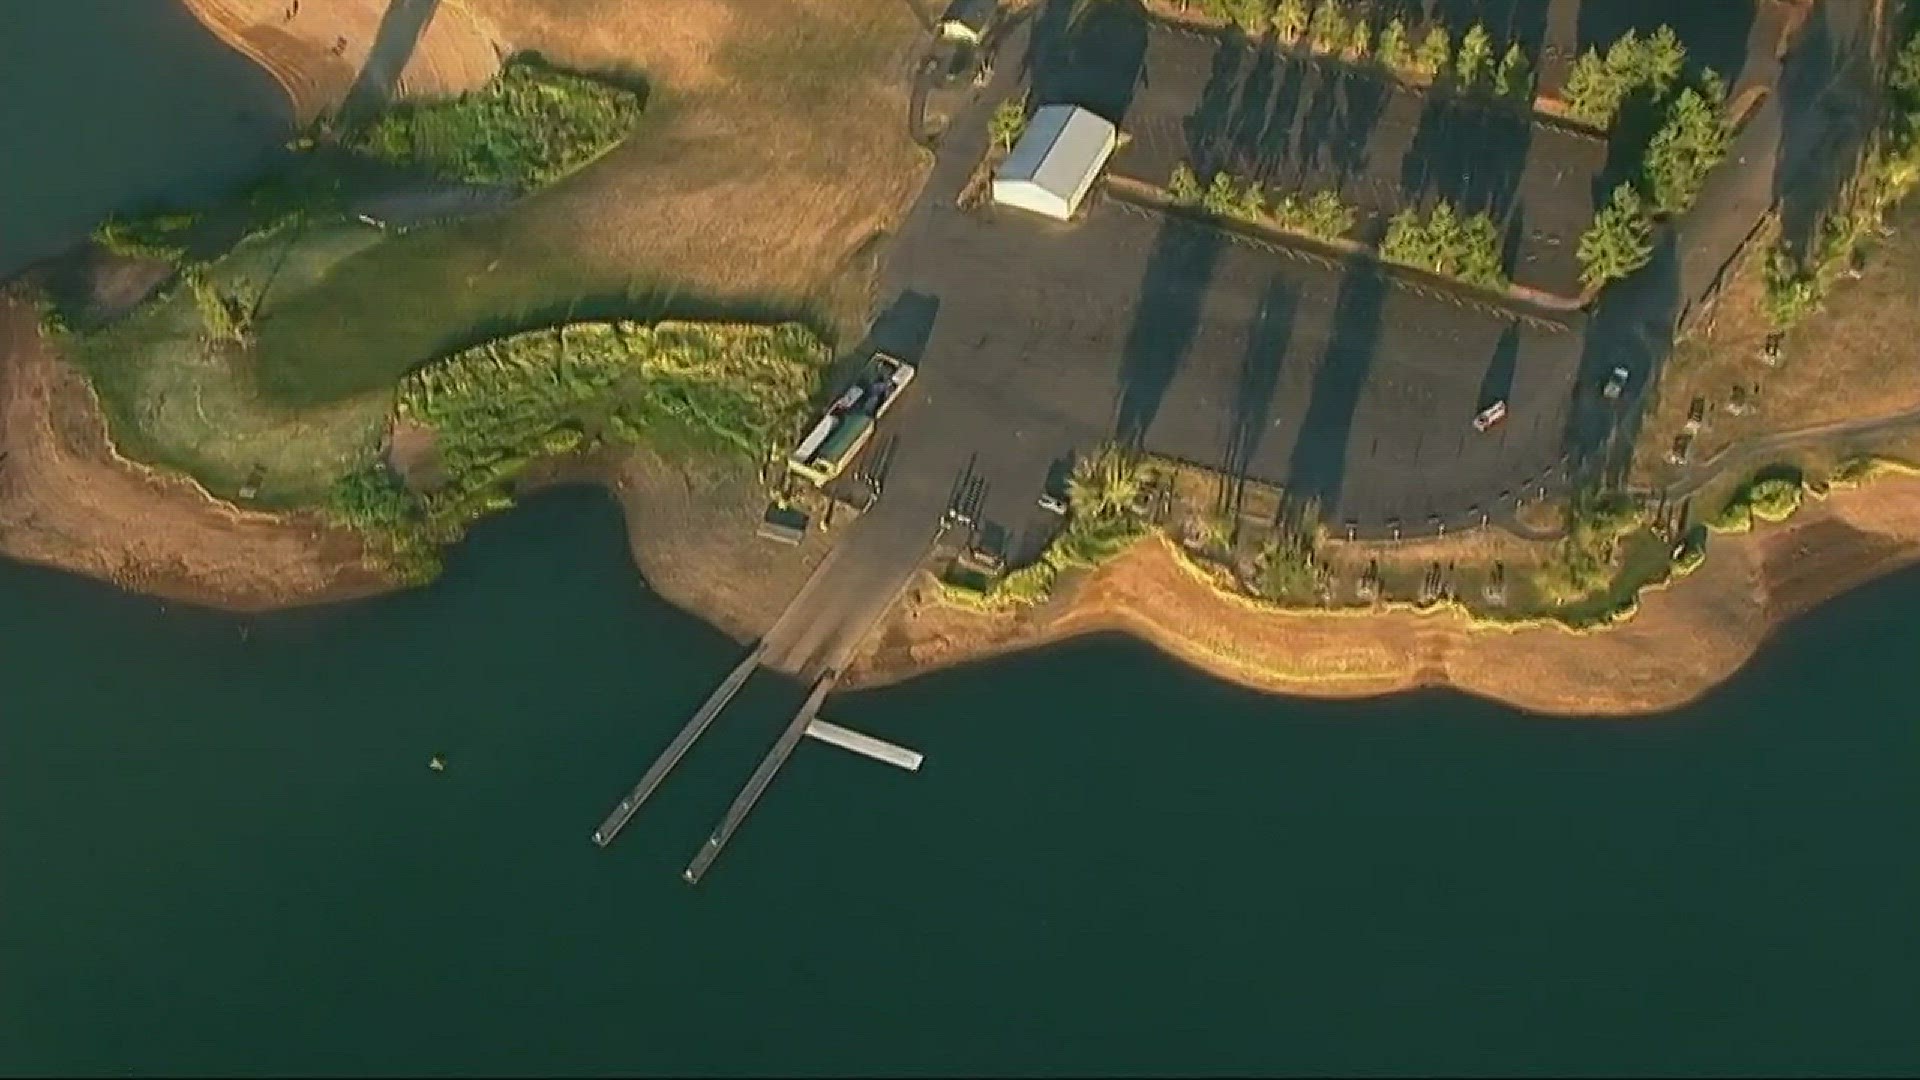 Body of missing swimmer found in Hagg Lake